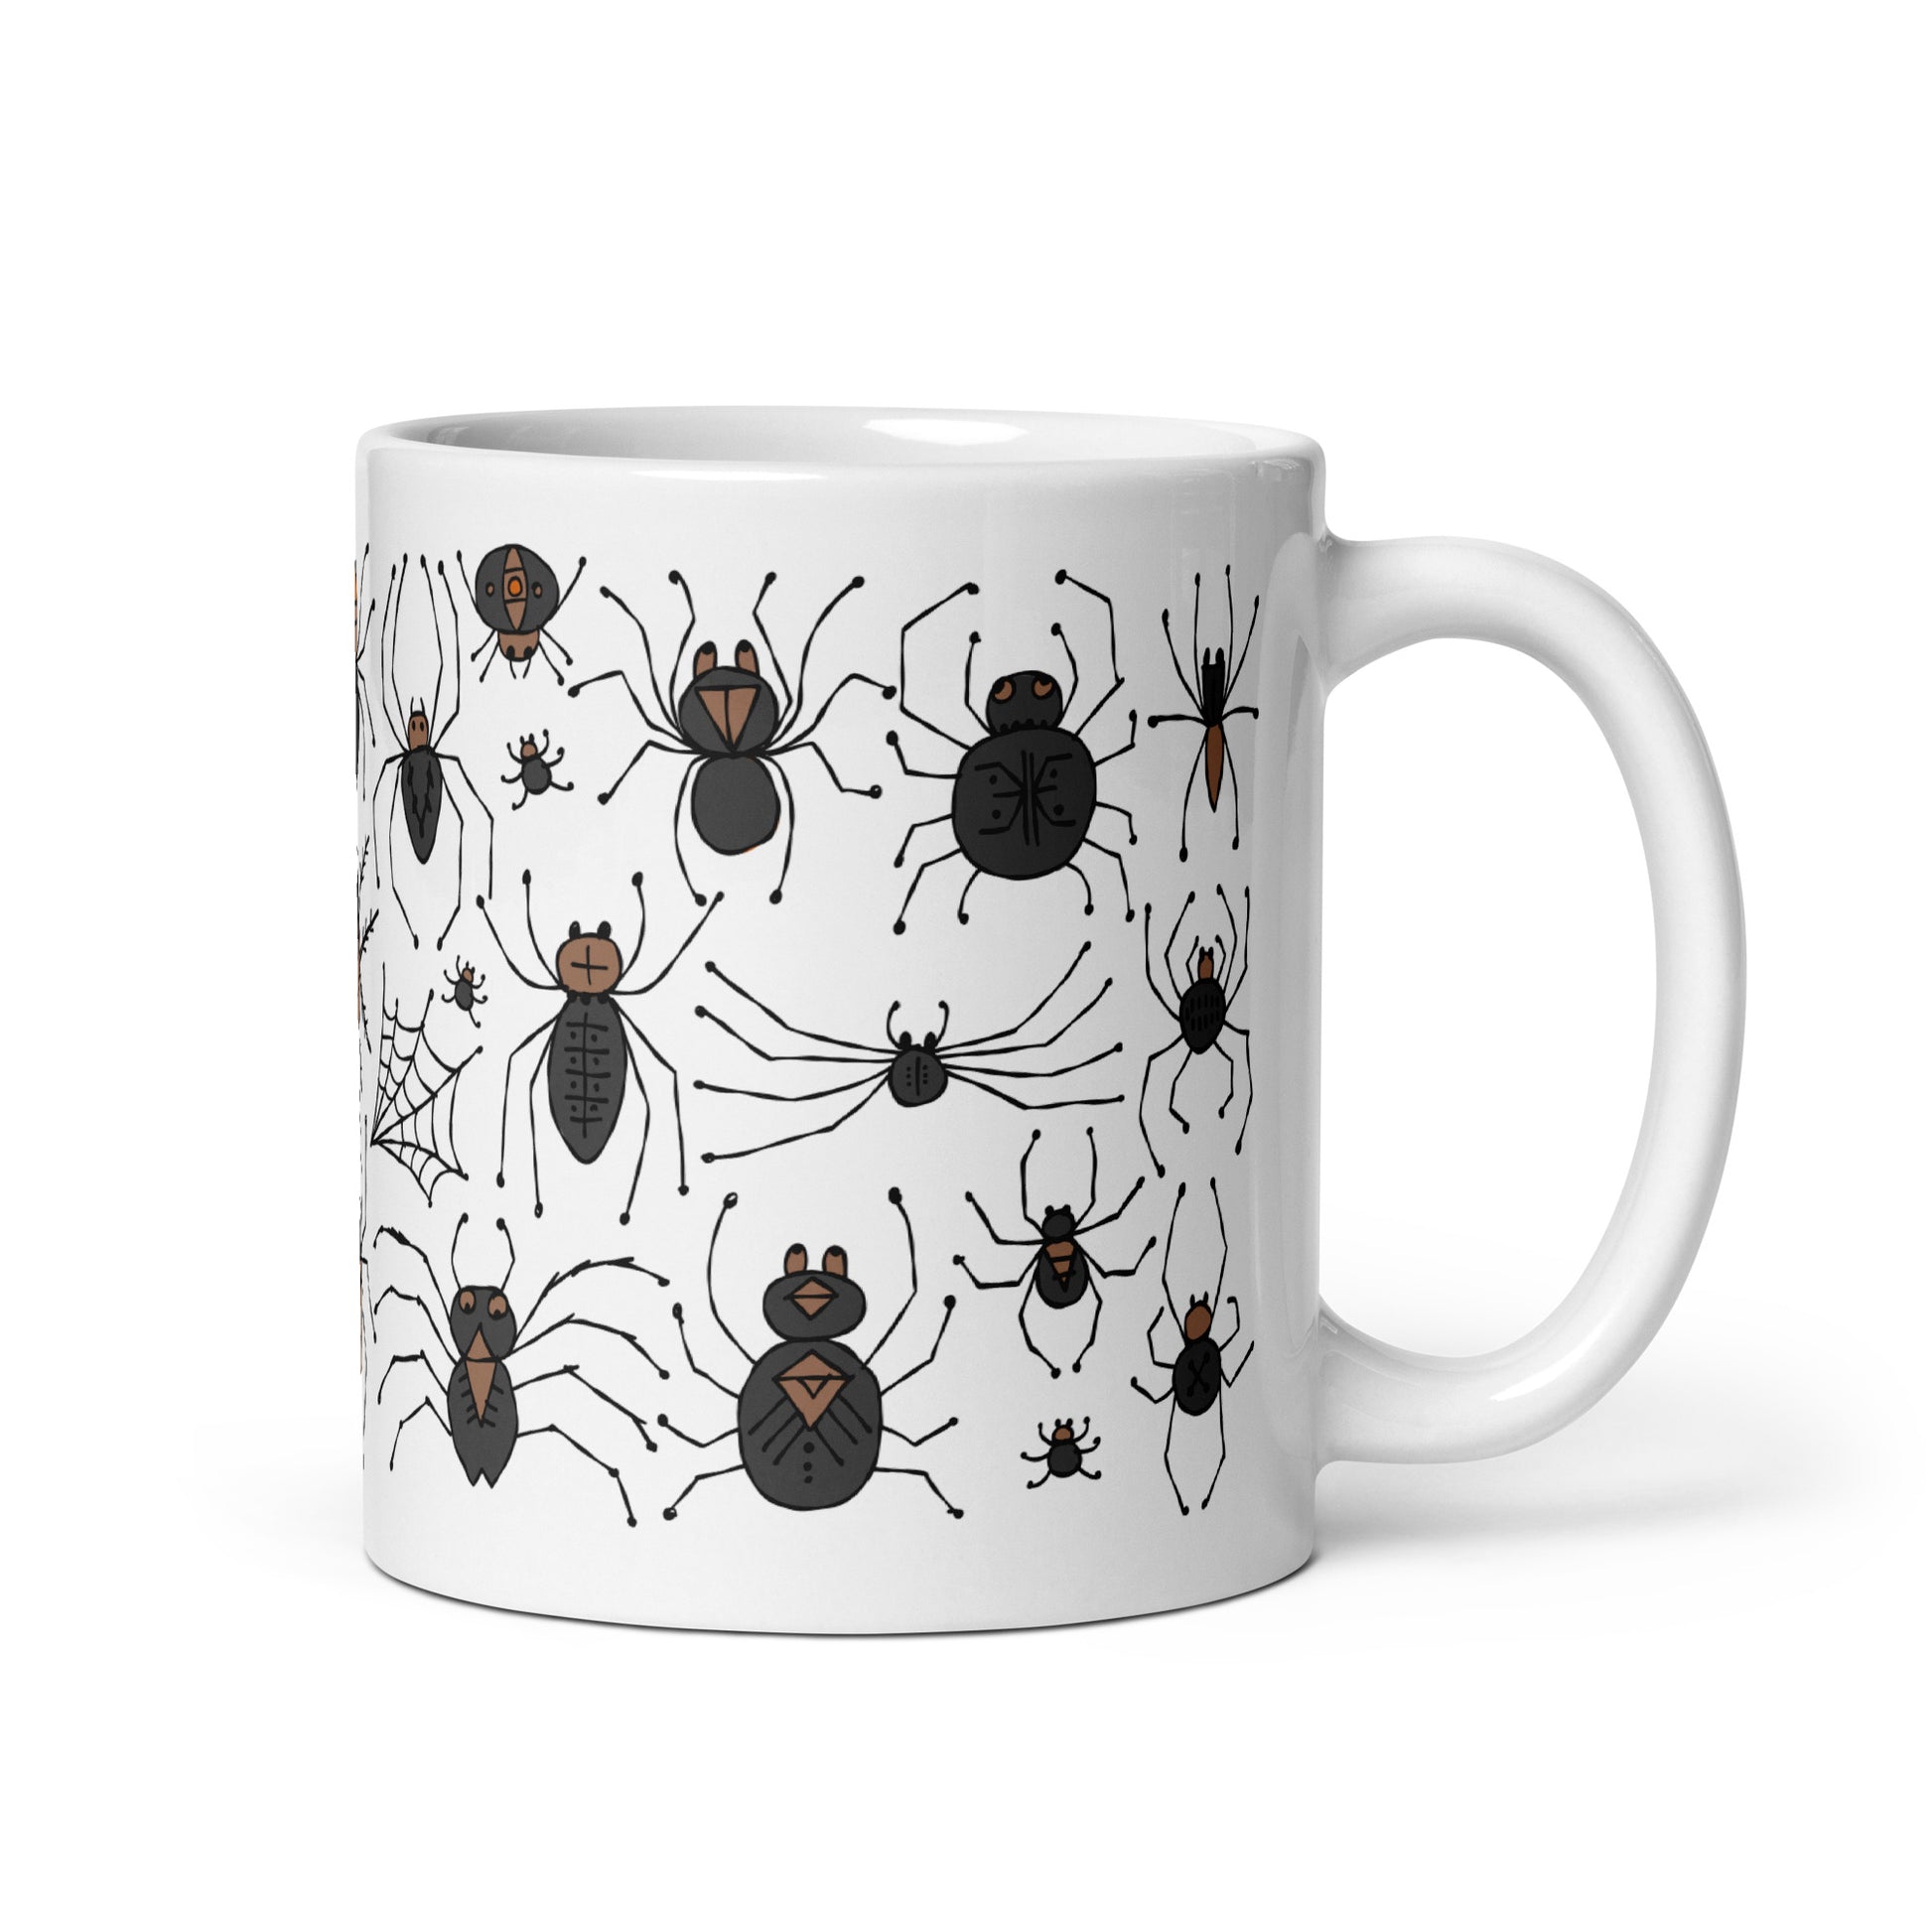 Ceramic mug 11oz with spiders for Arachnologist. Quote on mug: "Spiders are the artists of the insect world, spinning beauty from silk." - Jane Goodall. Back side